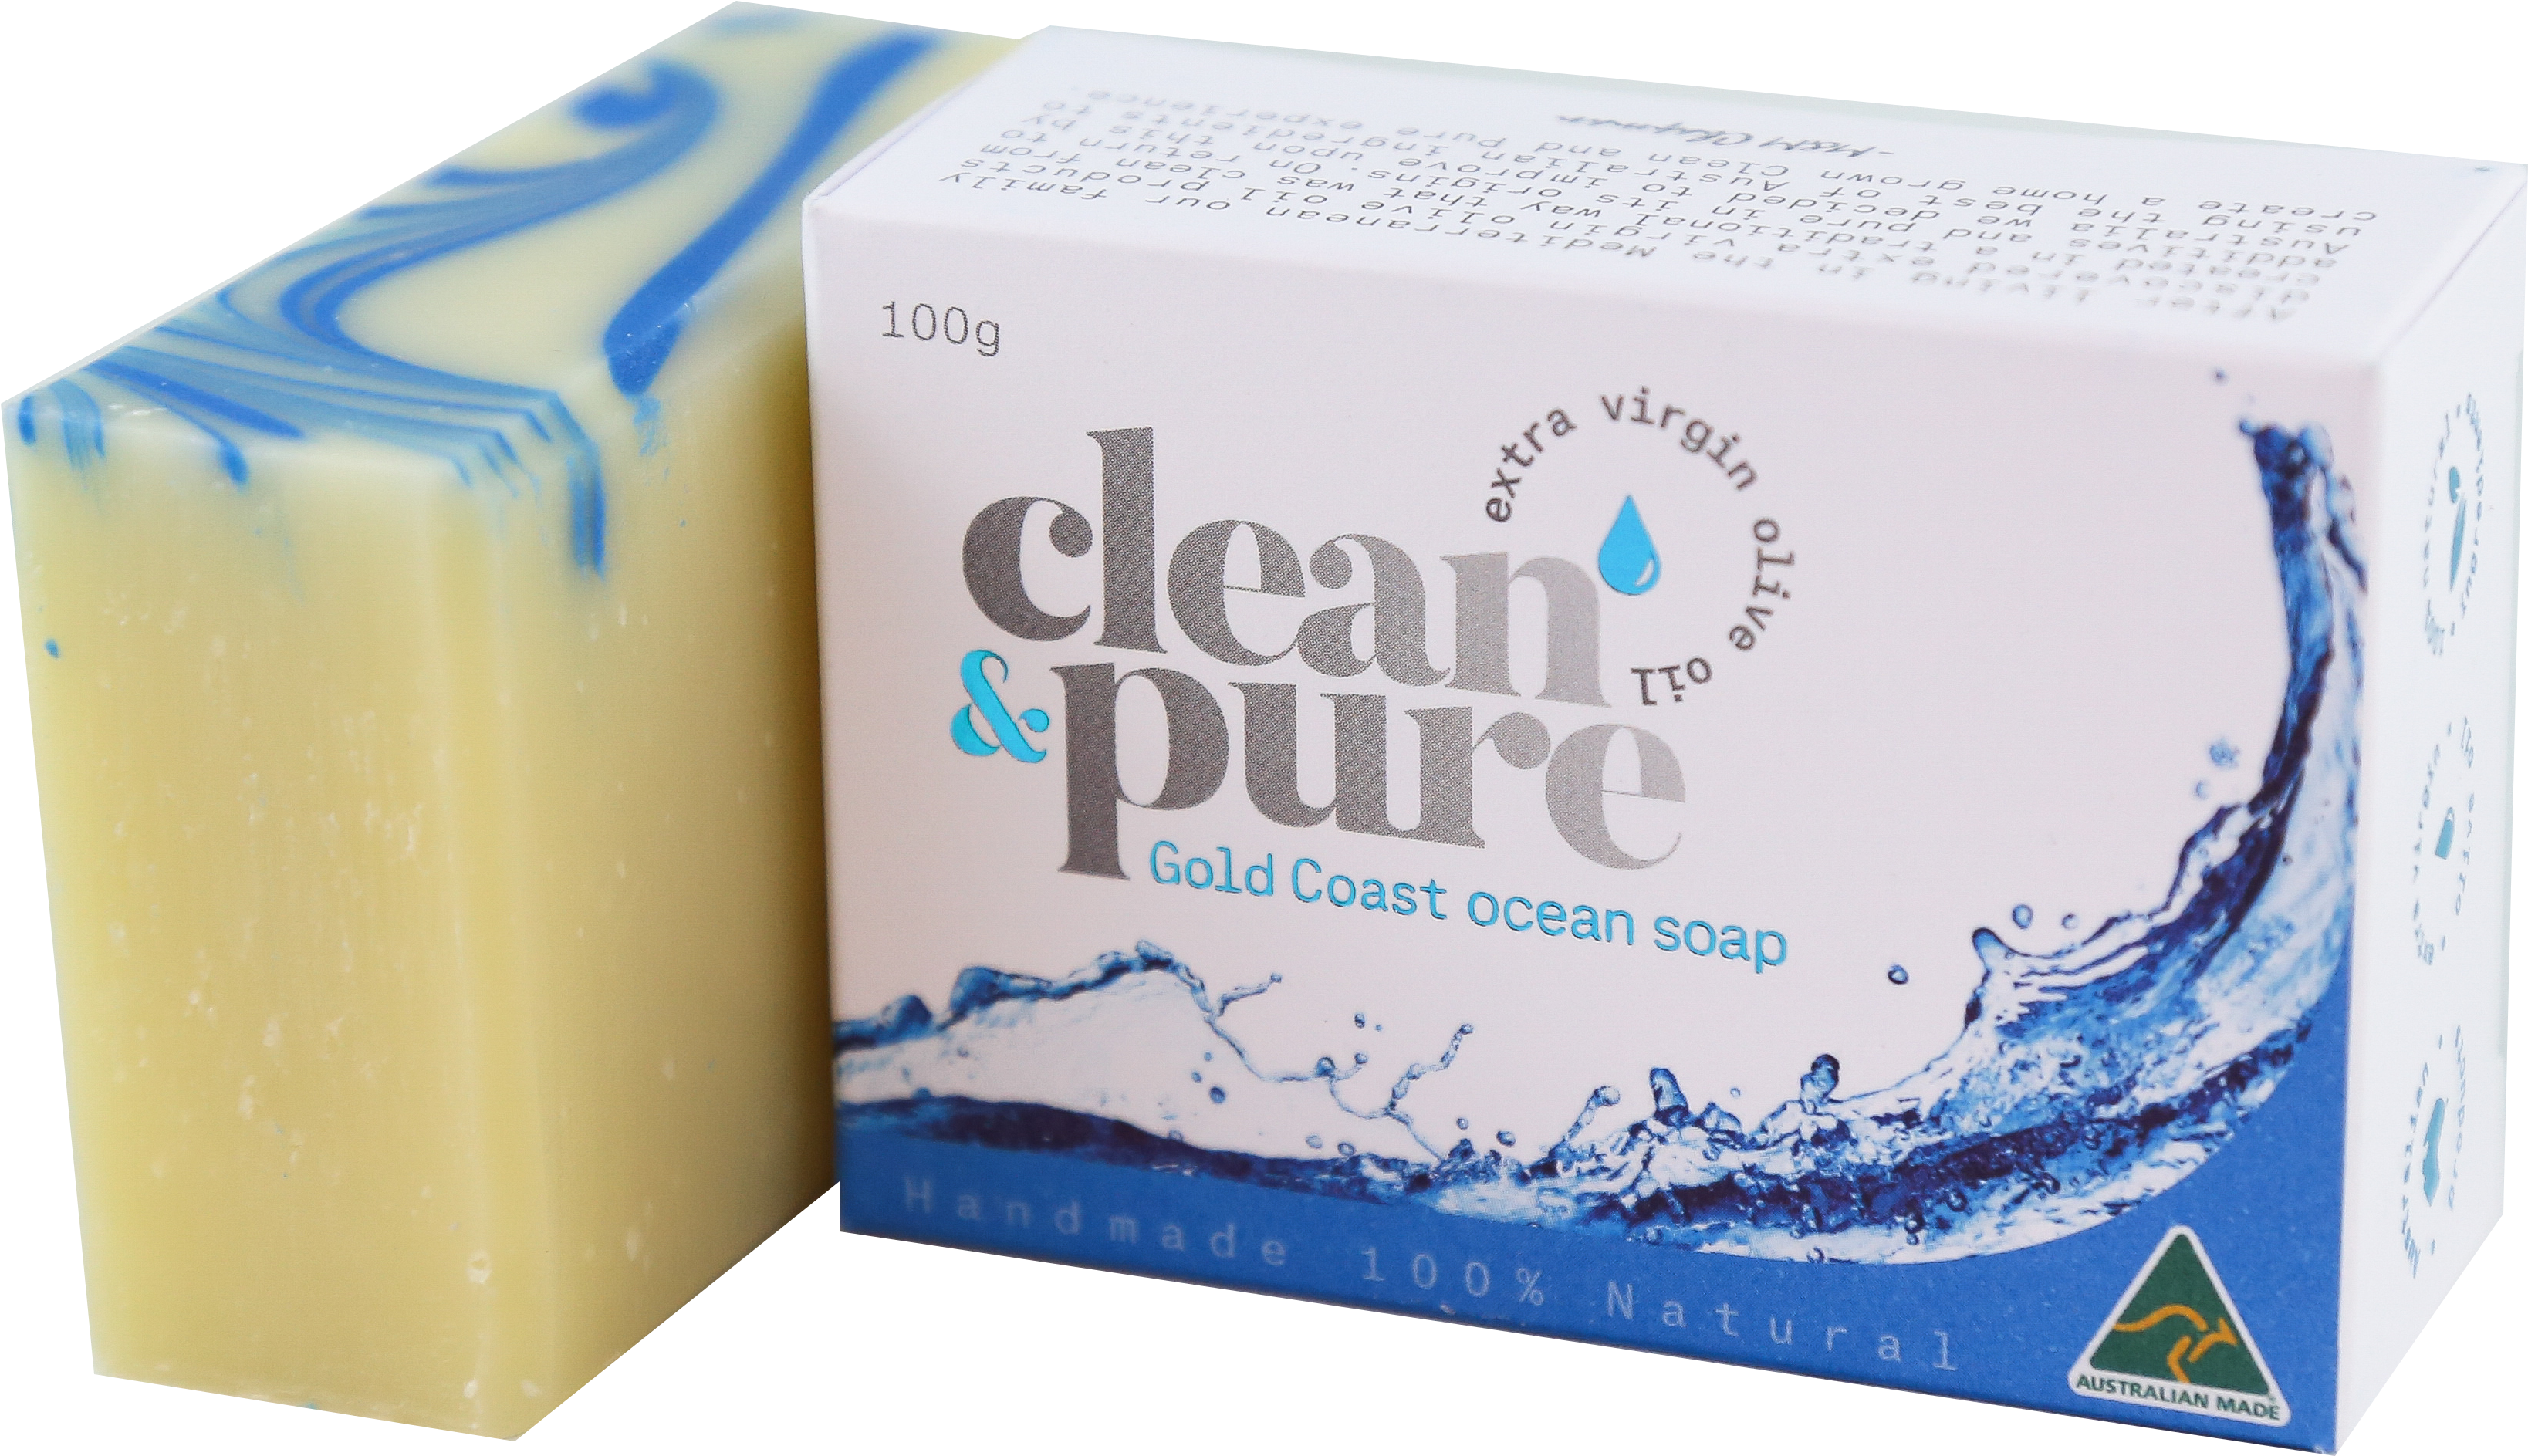 Clean & Pure Ocean Soap Made From Gold Coast Filtered - Carton (5472x3648)